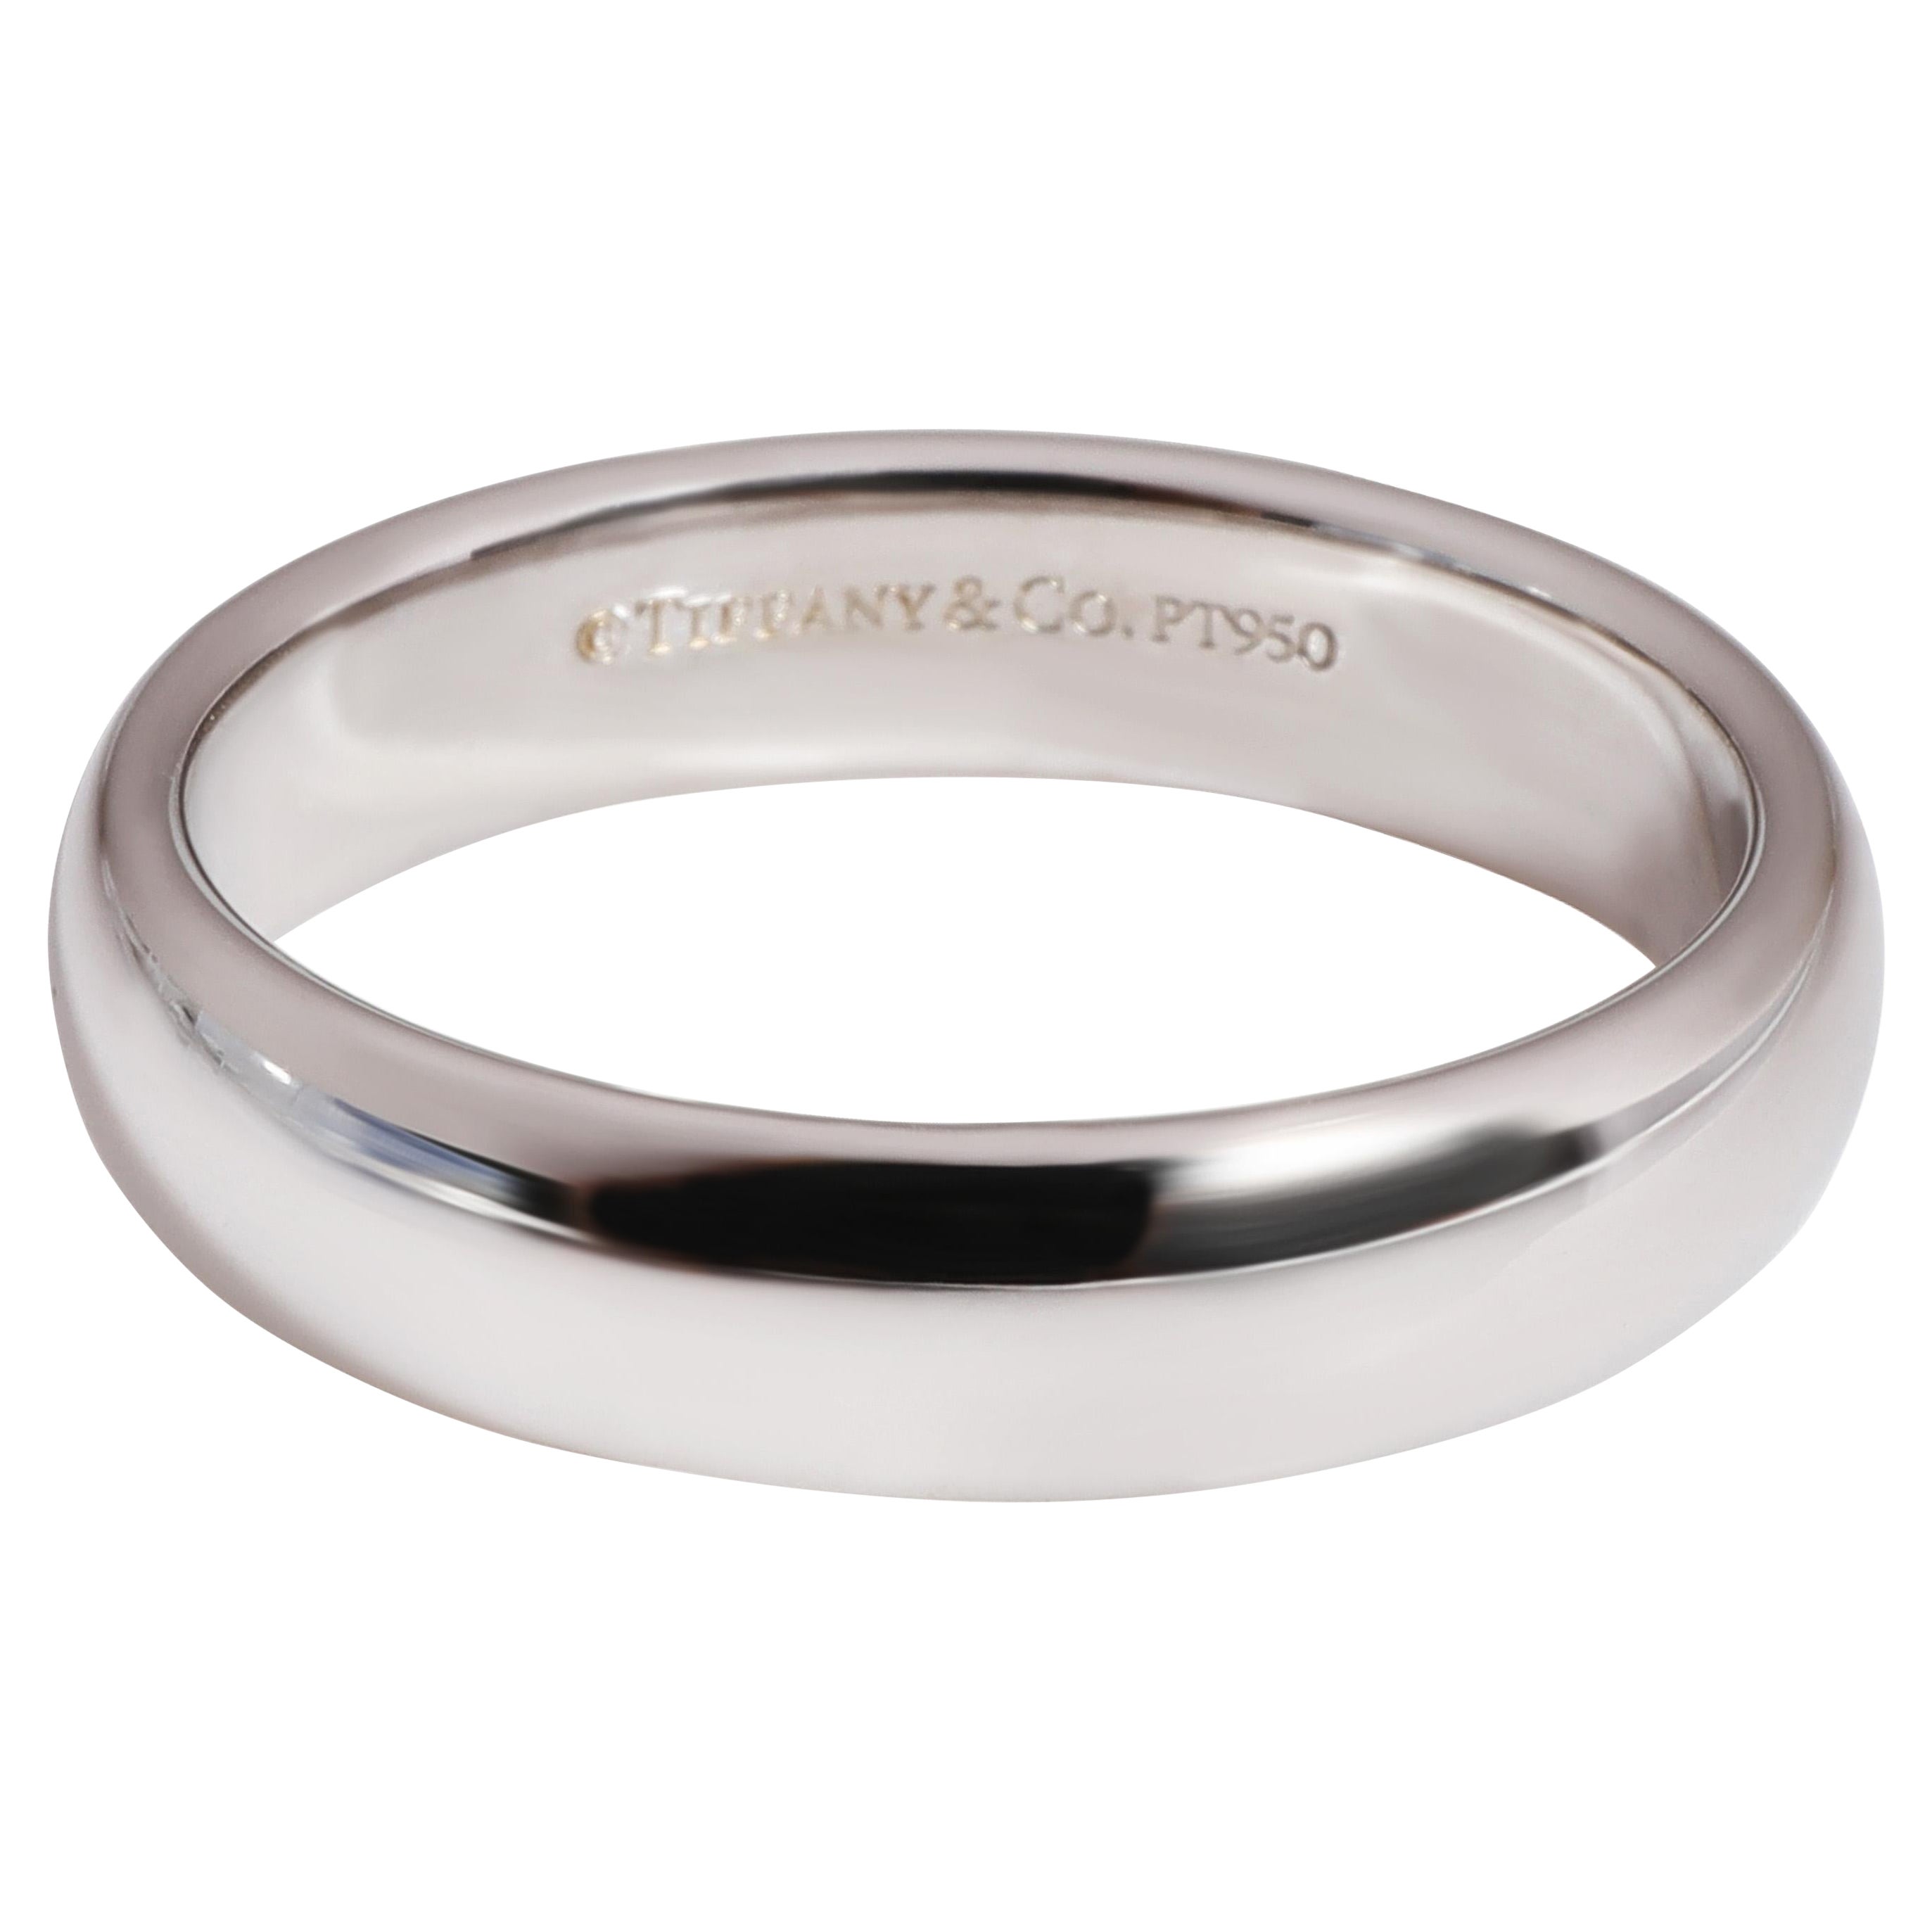 Tiffany and Co. Klassisches Ehering in Platin im Angebot bei 1stDibs